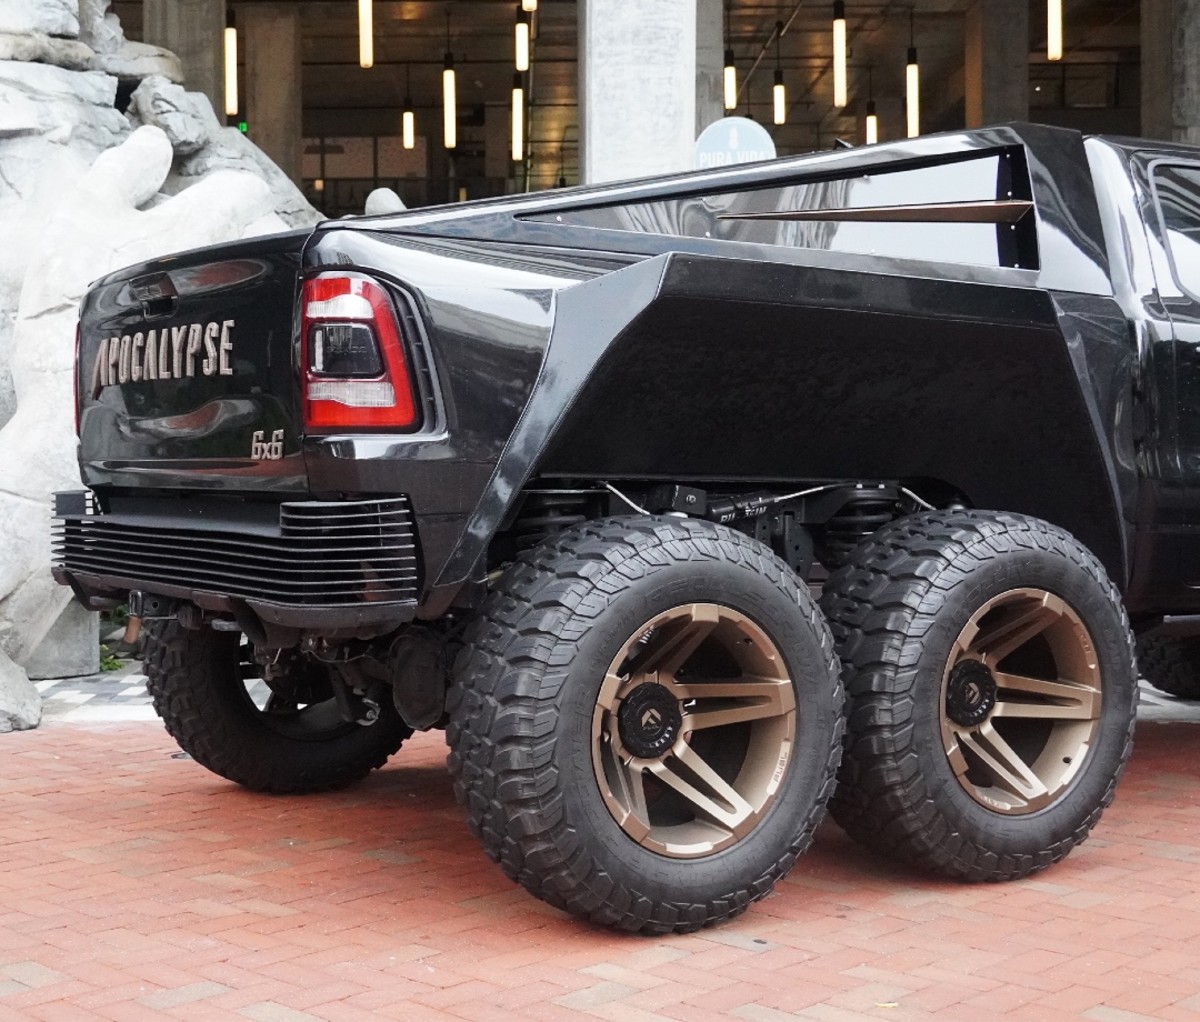 Apocalypse's Juggernaut 6x6 has serious on and off road chops.